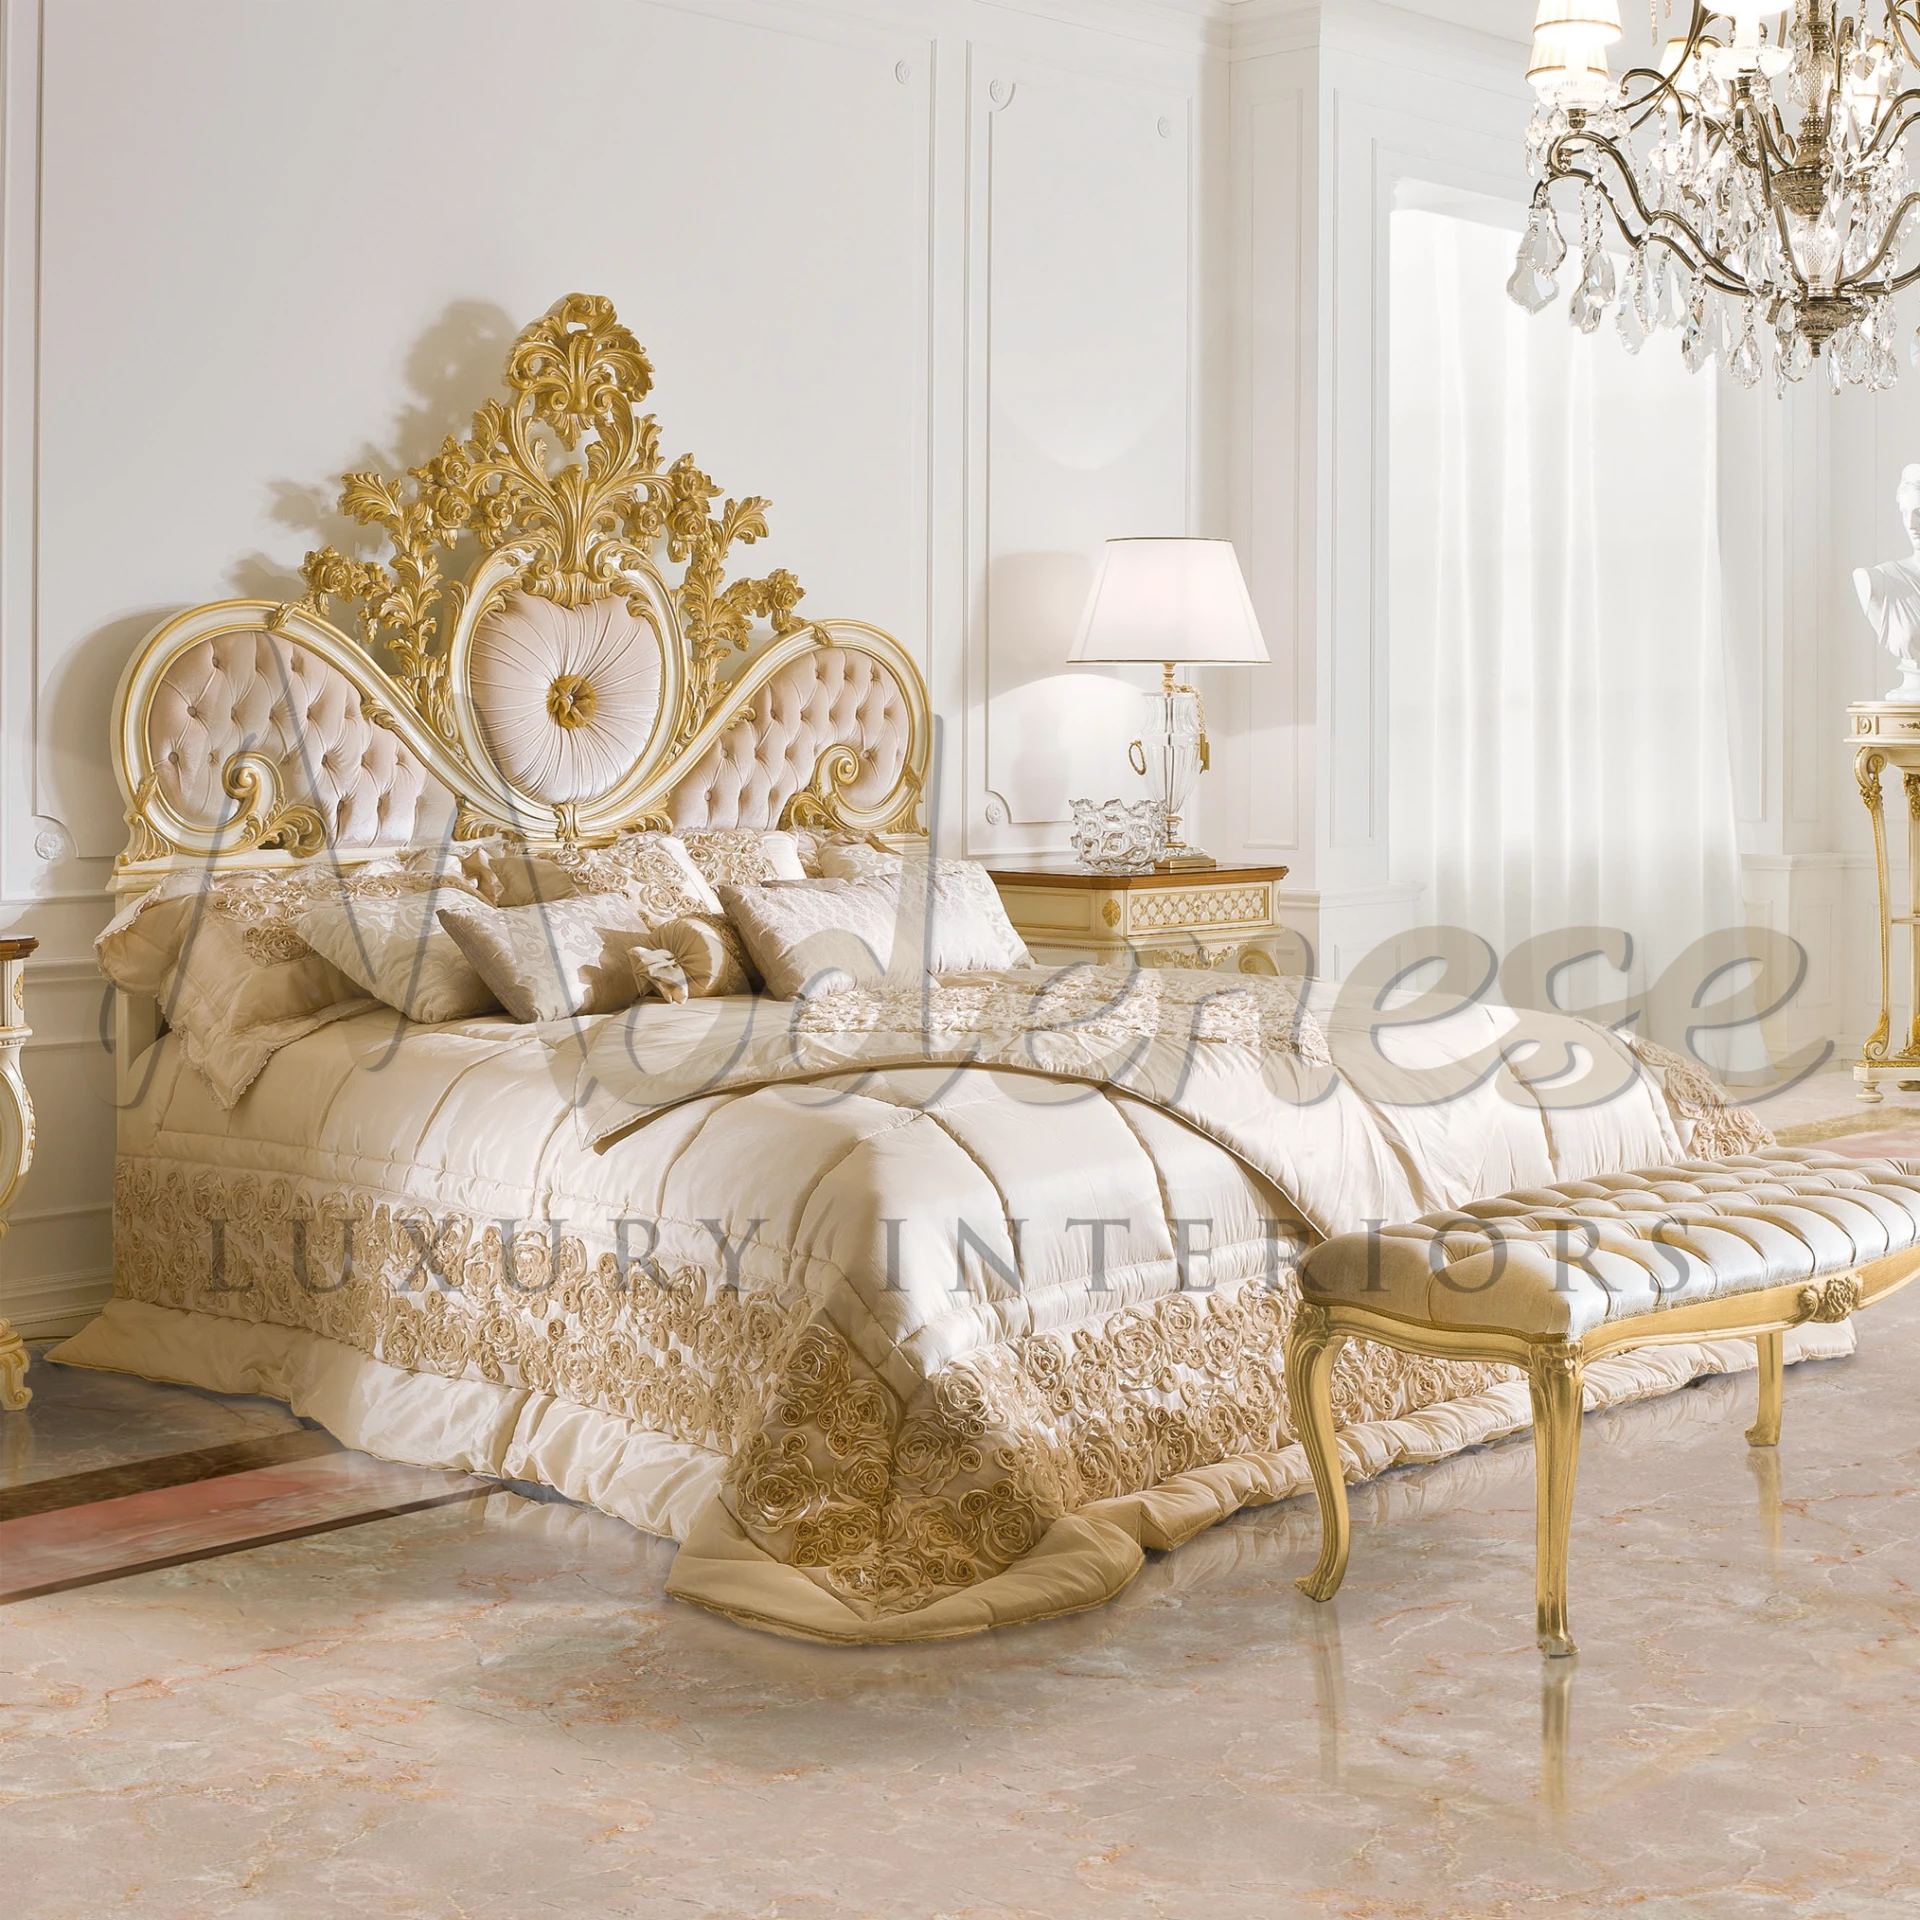 Luxurious Modenese Duchess Cushion, adding elegance to any space, perfect for luxurious decor.